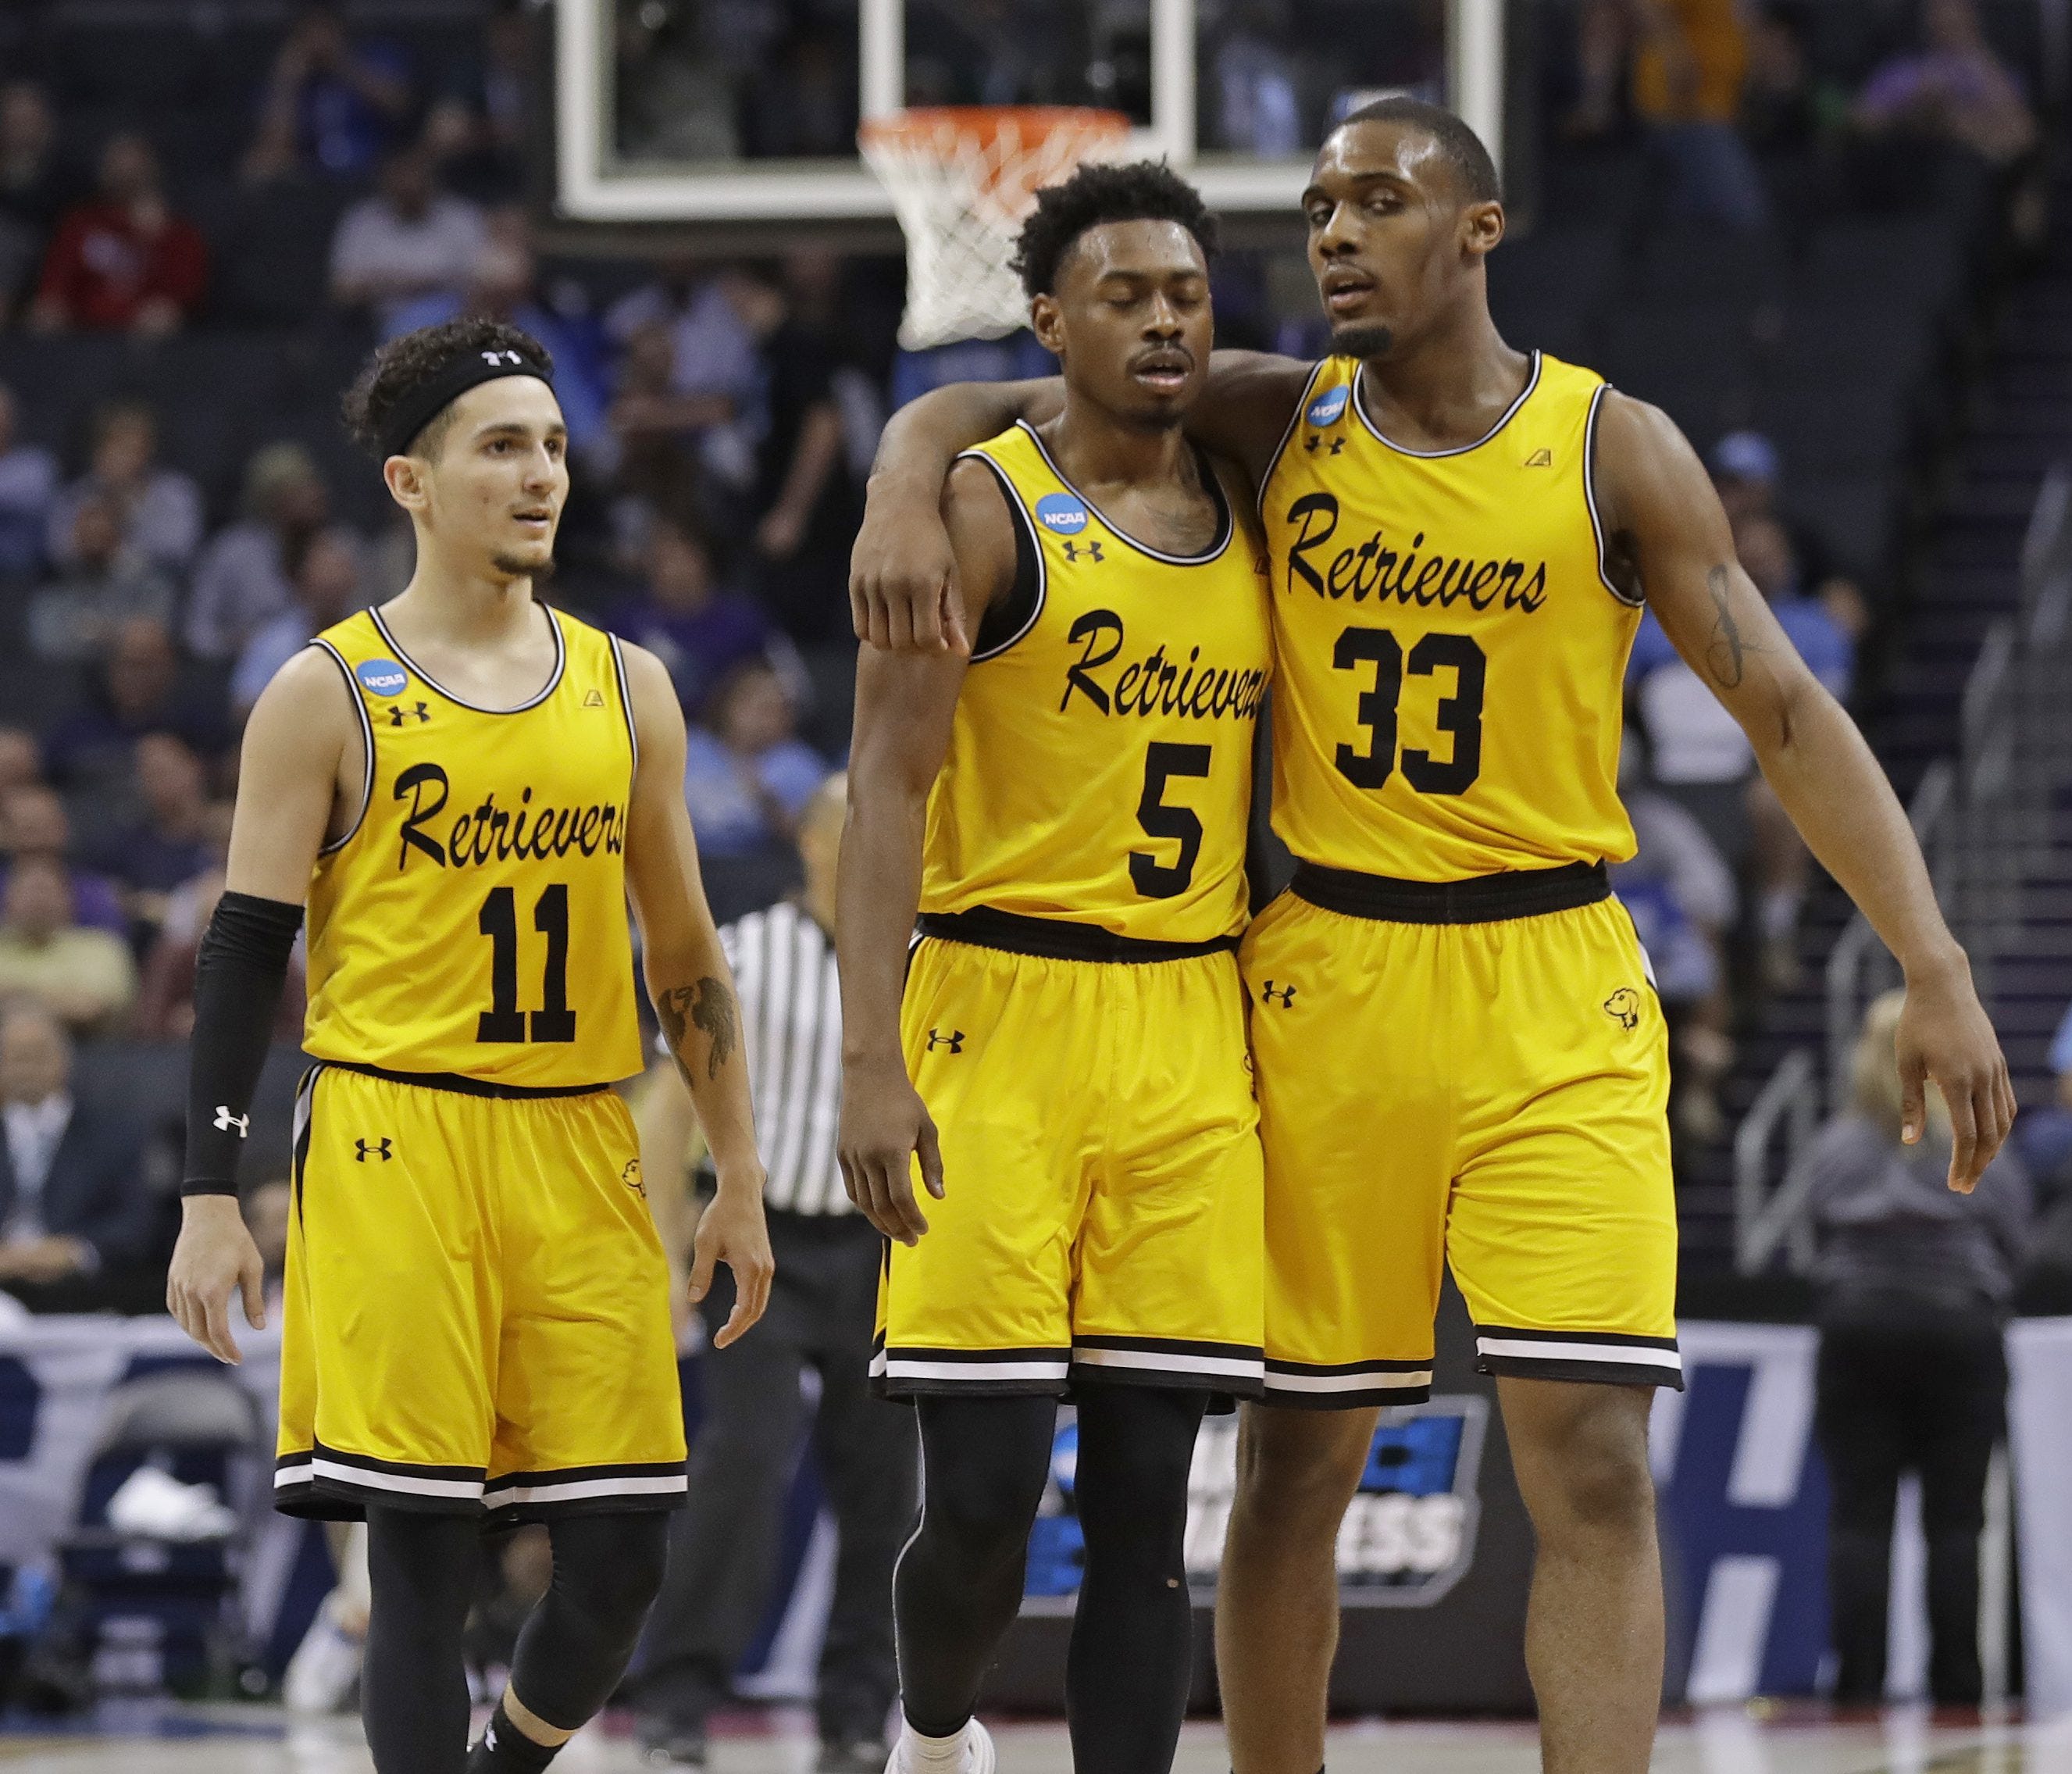 UMBC's Arkel Lamar, Jourdan Grant and K.J. Maura, from right, embrace as they leave the court in the closing moments of the team's 50-43 loss to Kansas State in a second-round game in the NCAA men's college basketball tournament in Charlotte, N.C., S